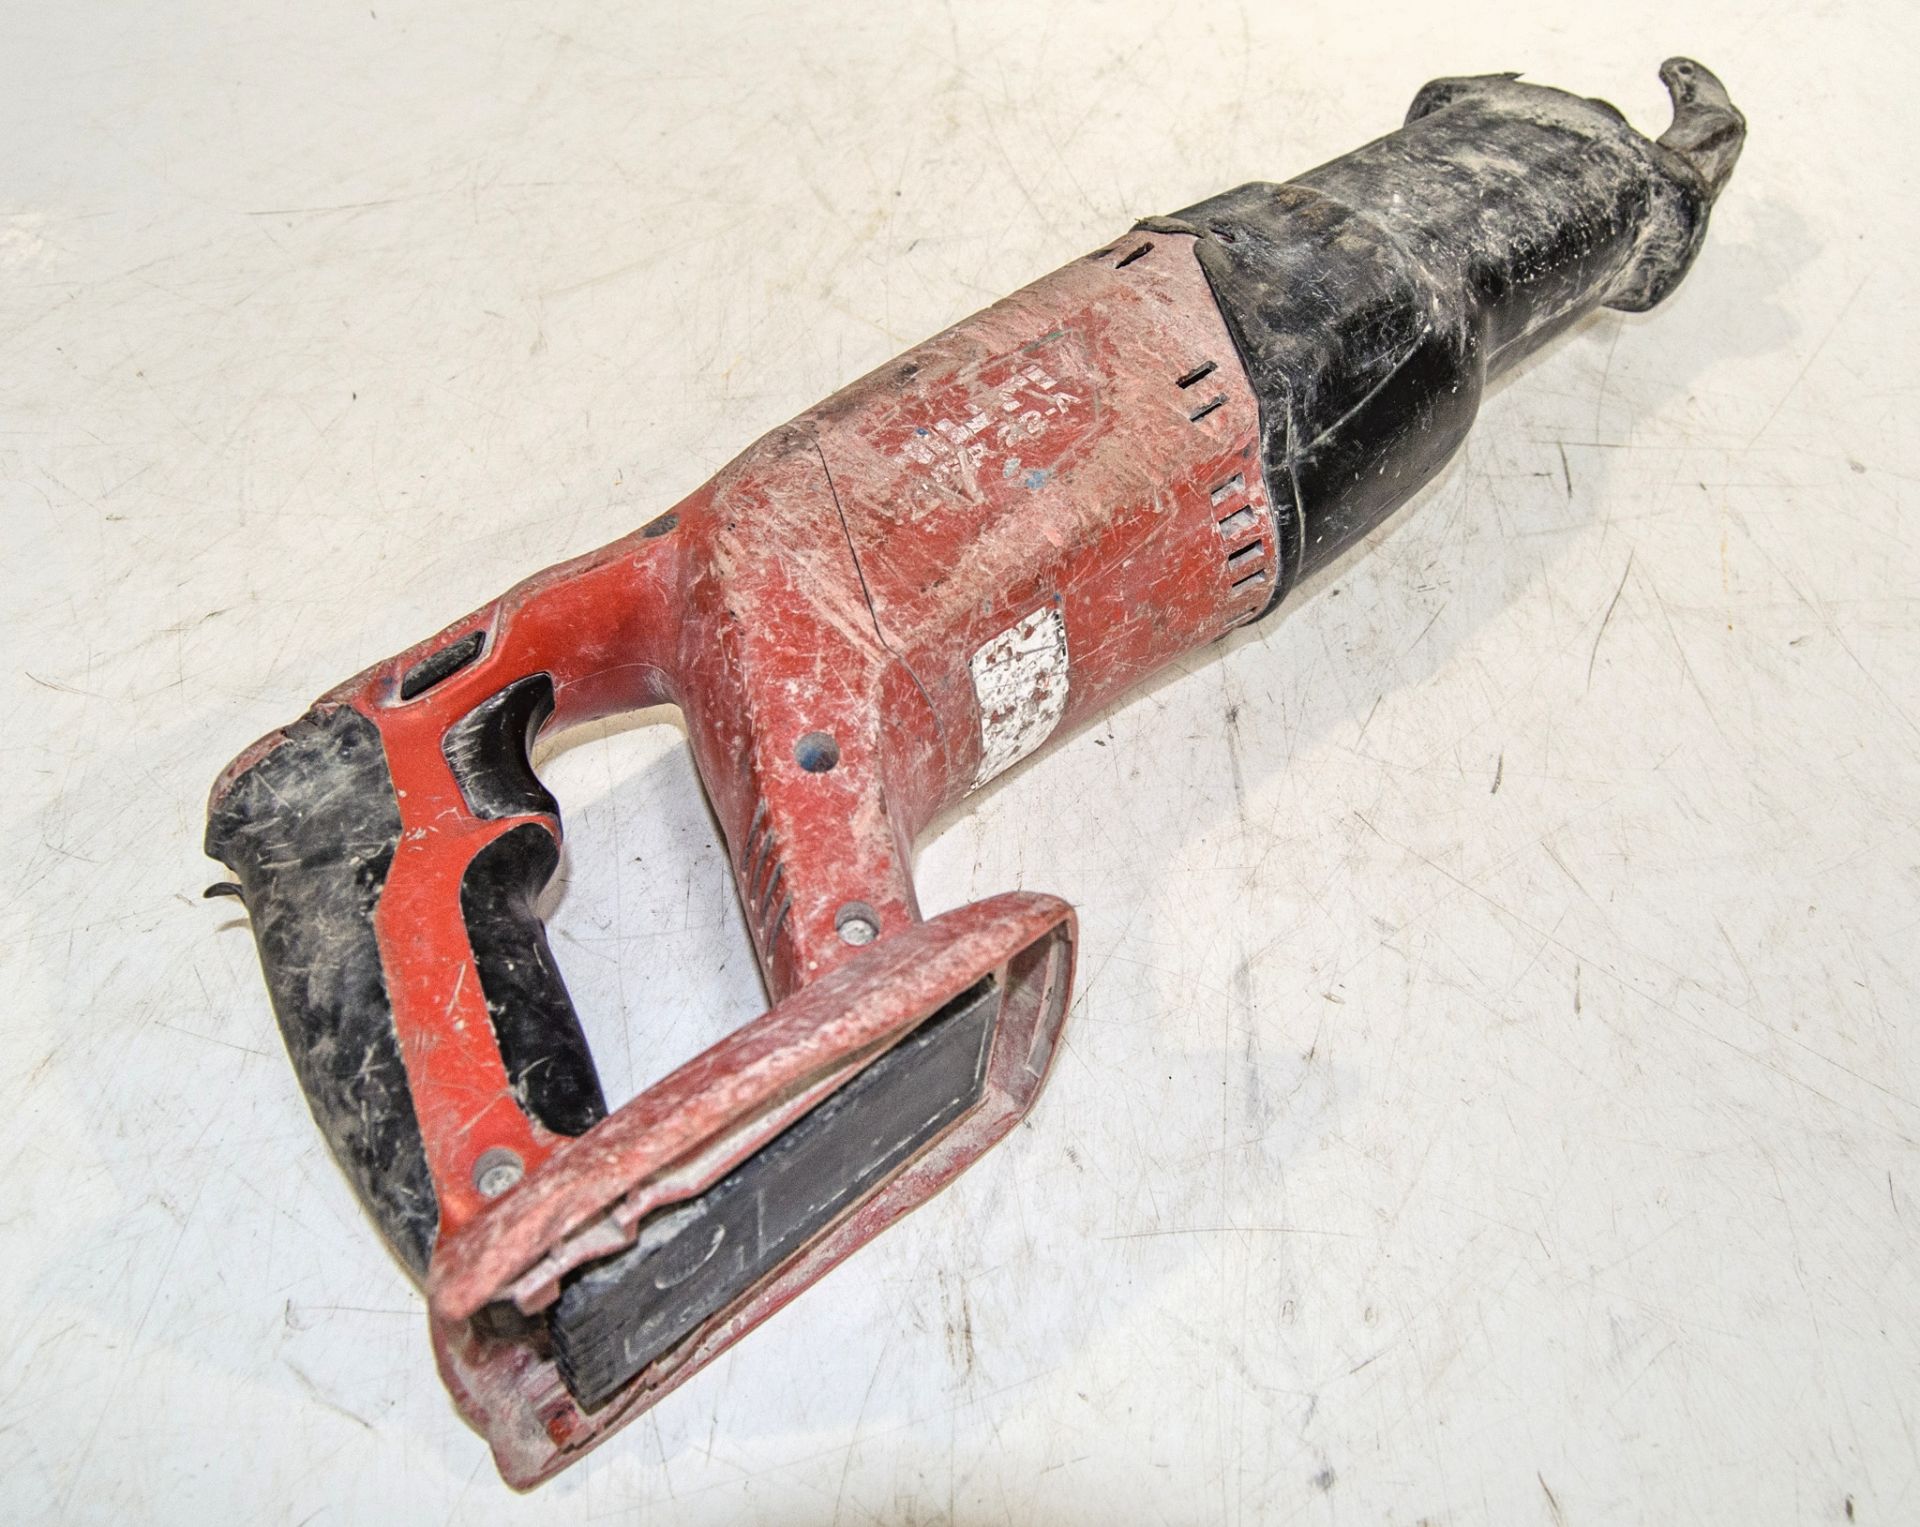 Hilti WSR22A 22v cordless reciprocating saw V0195 ** No battery or charger ** - Image 2 of 2